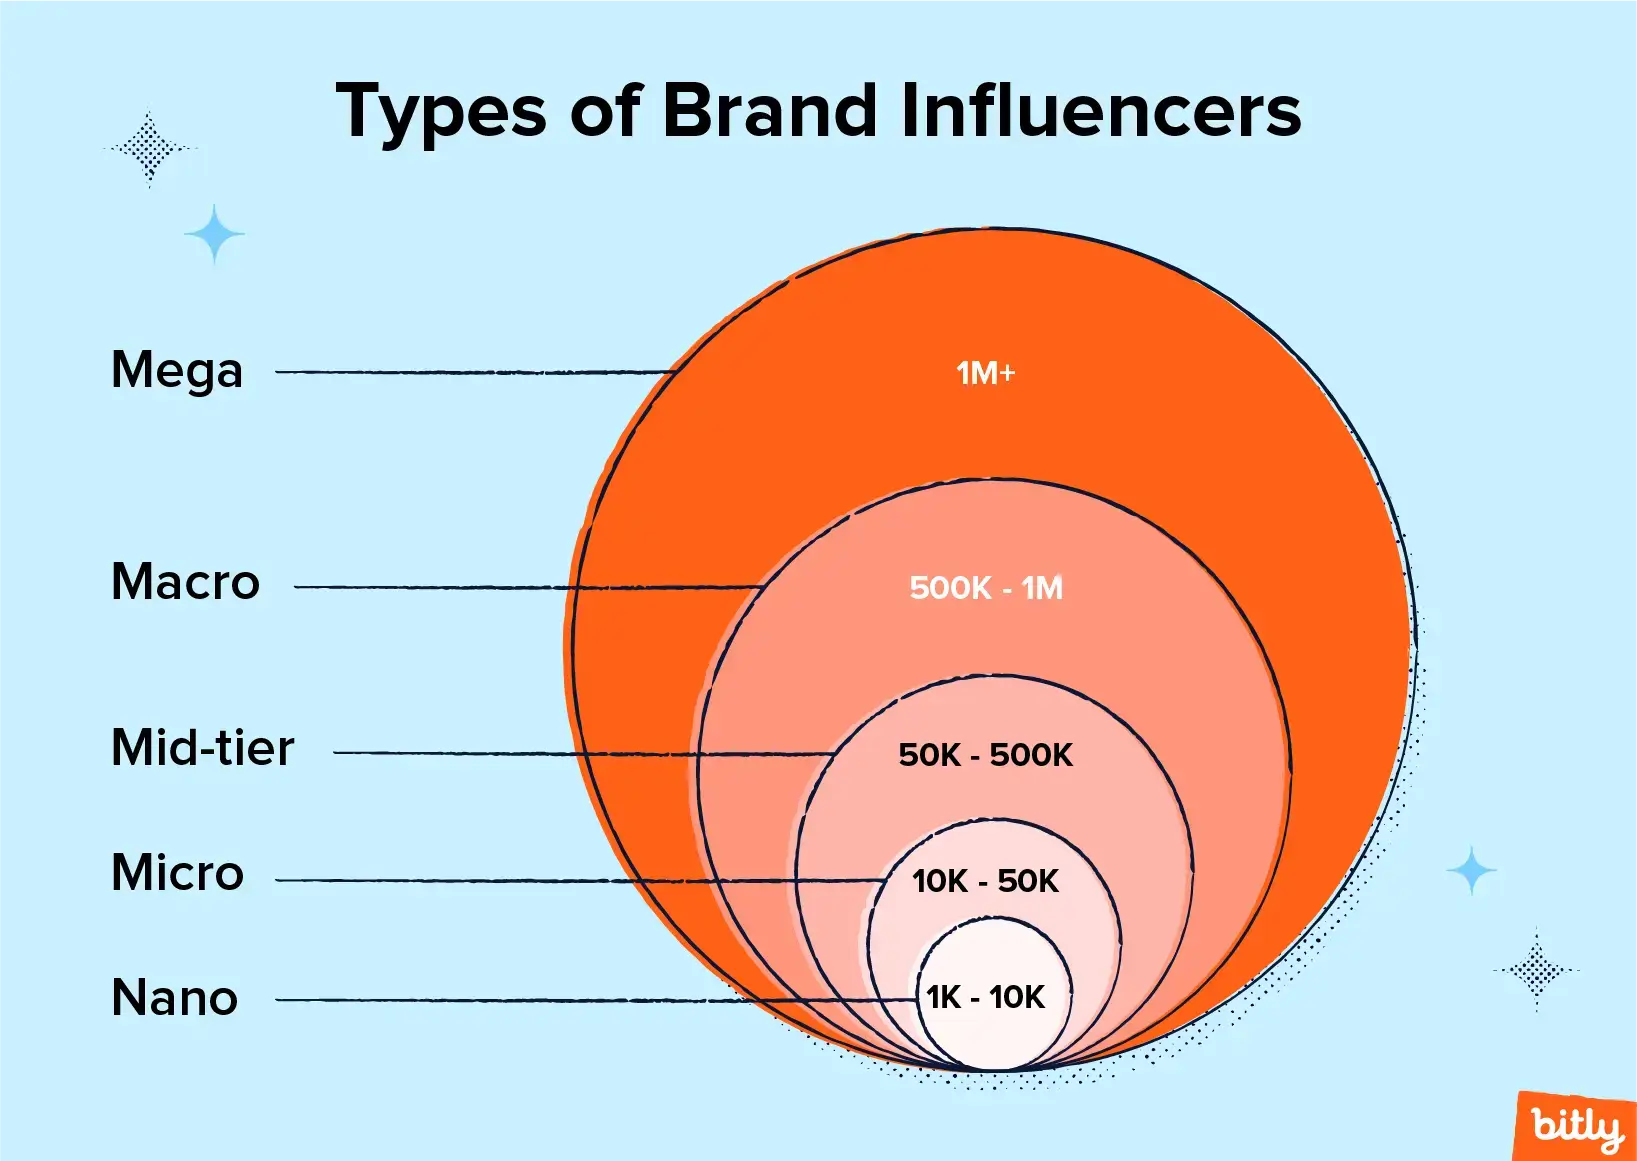 infographic of the five types of brand influencers and the number of followers associated with each